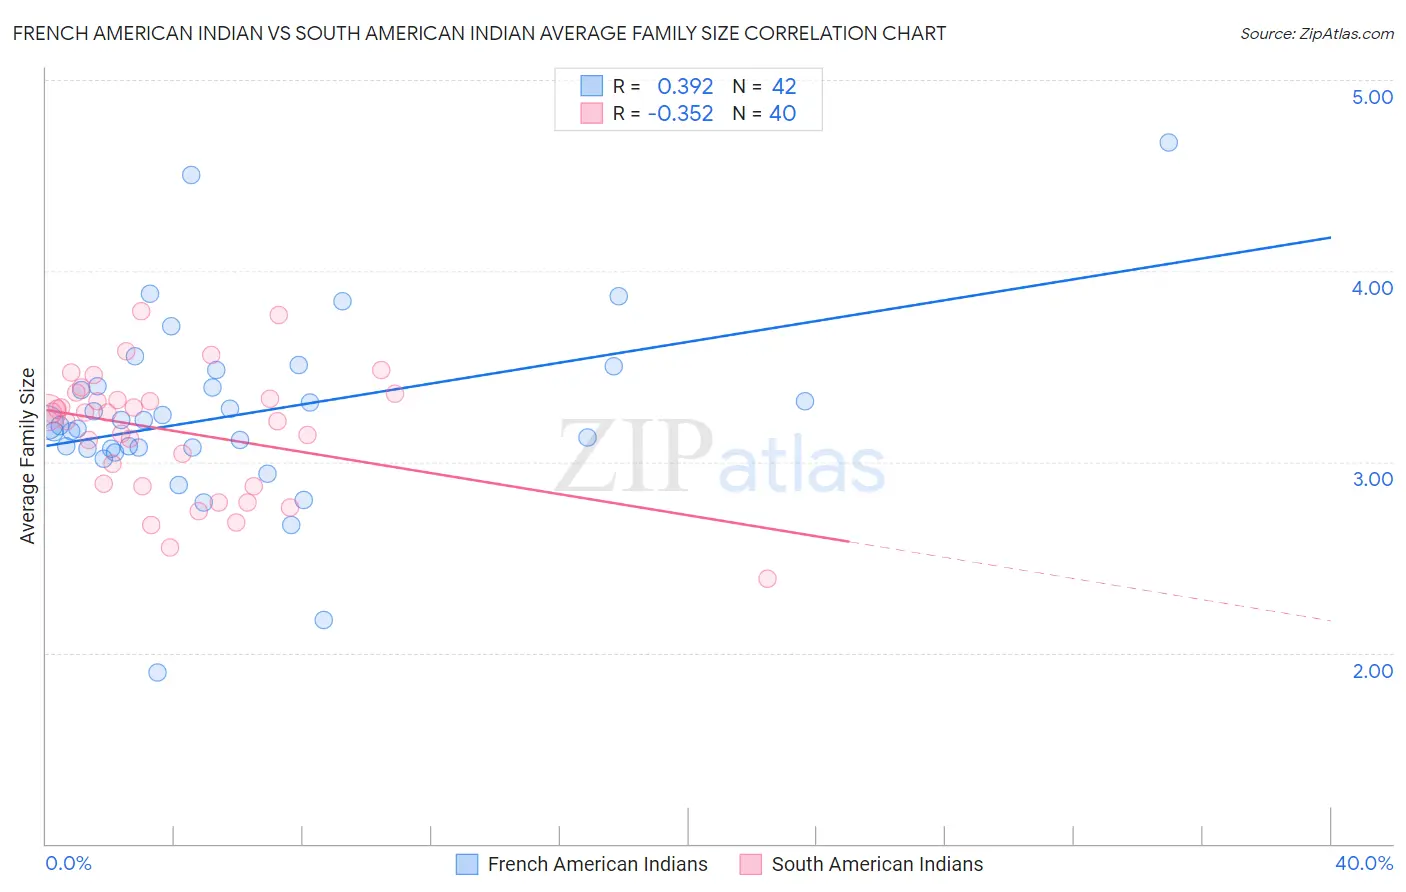 French American Indian vs South American Indian Average Family Size